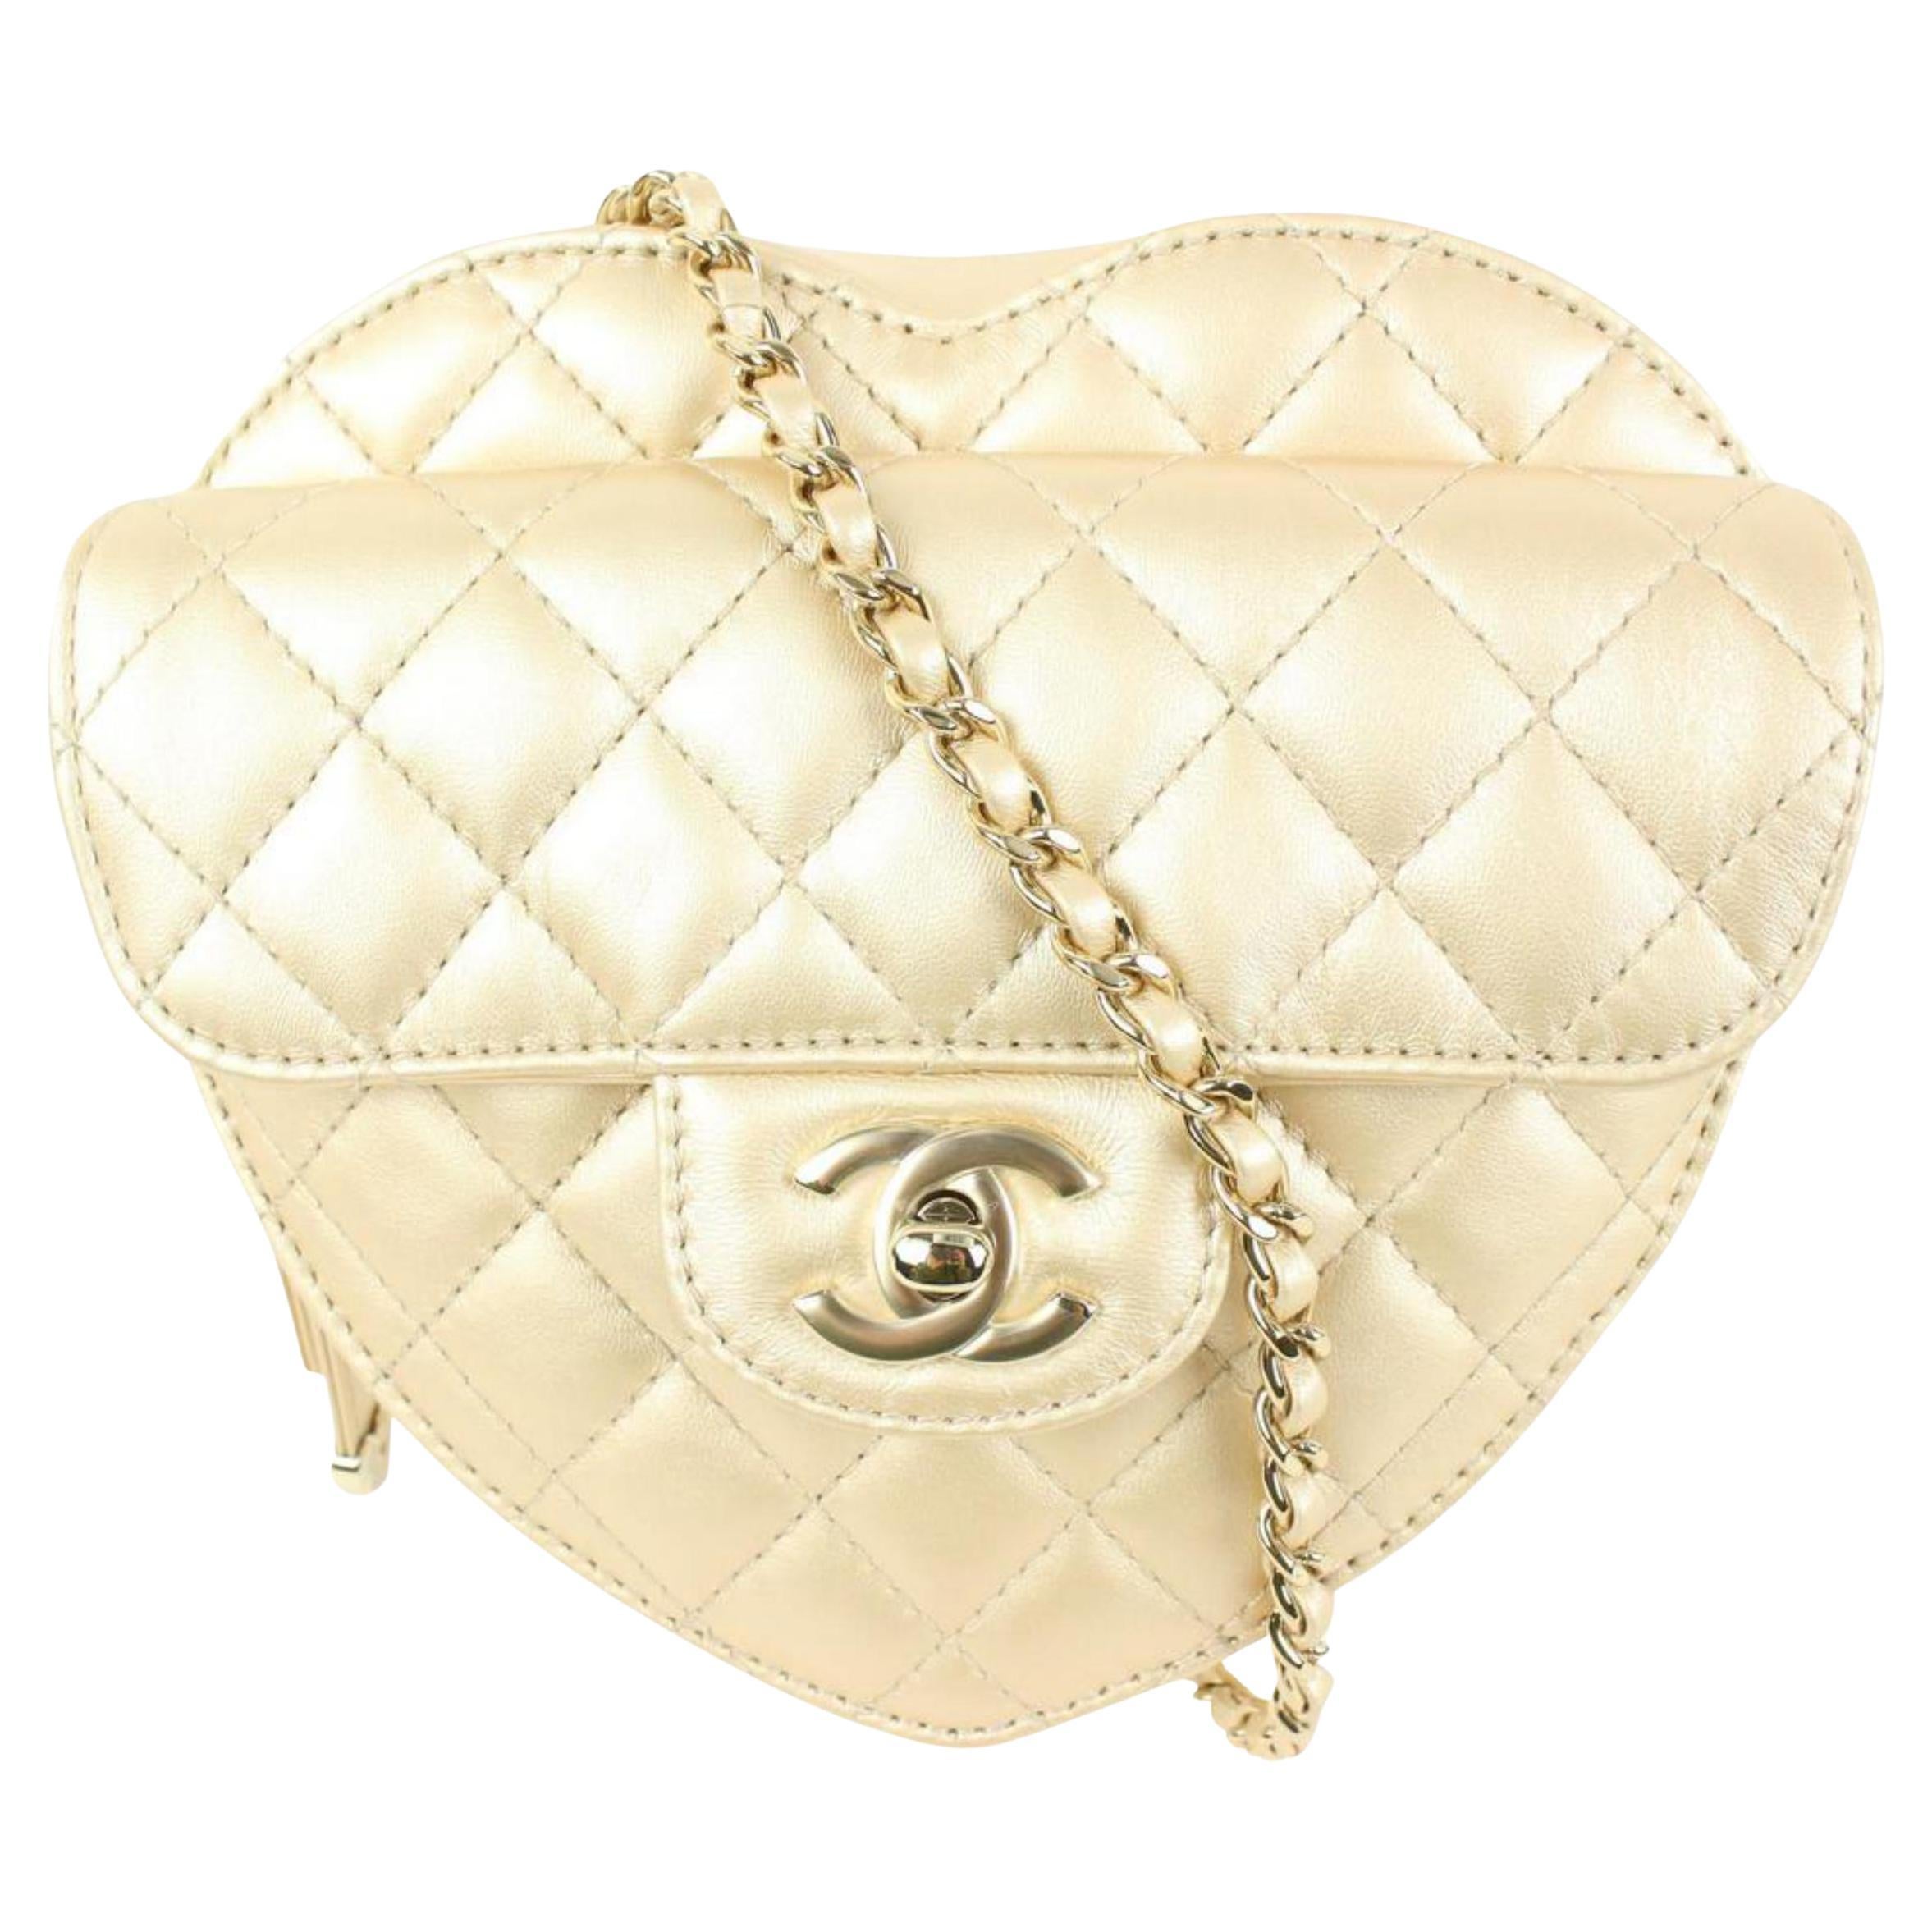 Chanel Gold Quilted Lambskin Large Heart Bag 41ck60